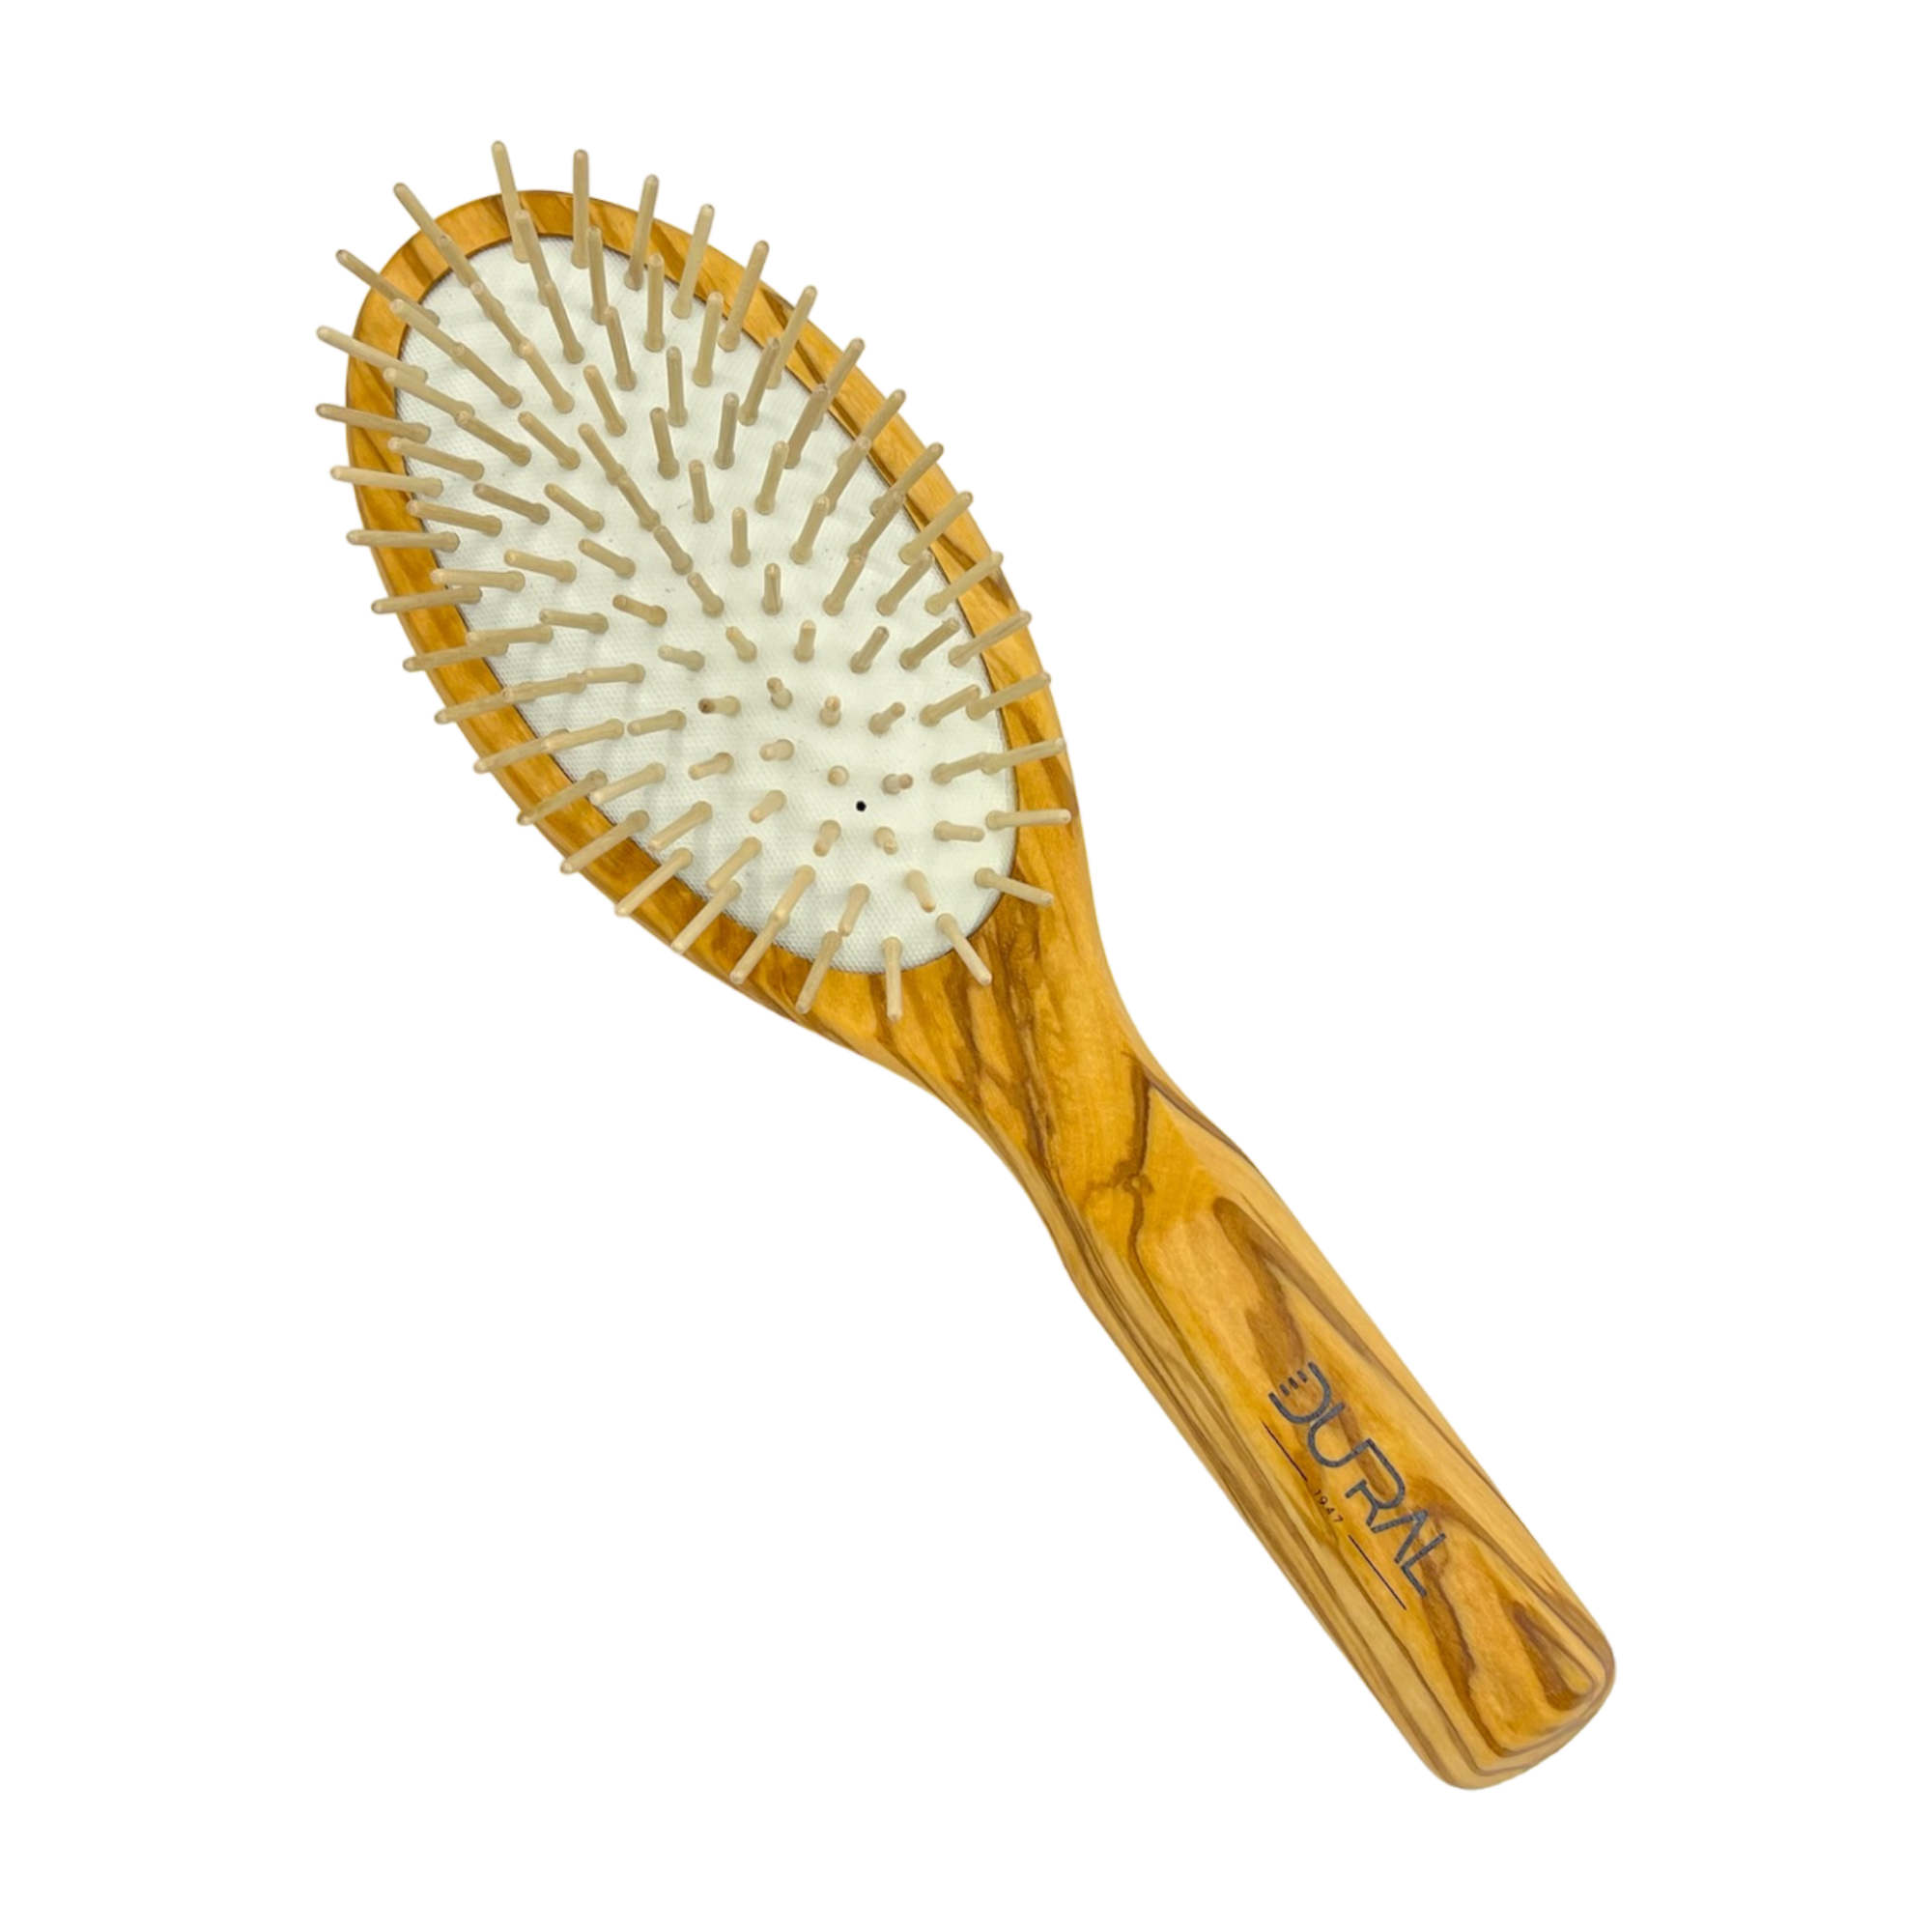 Dural Olive wood rubber cushion hair brush with wooden pins